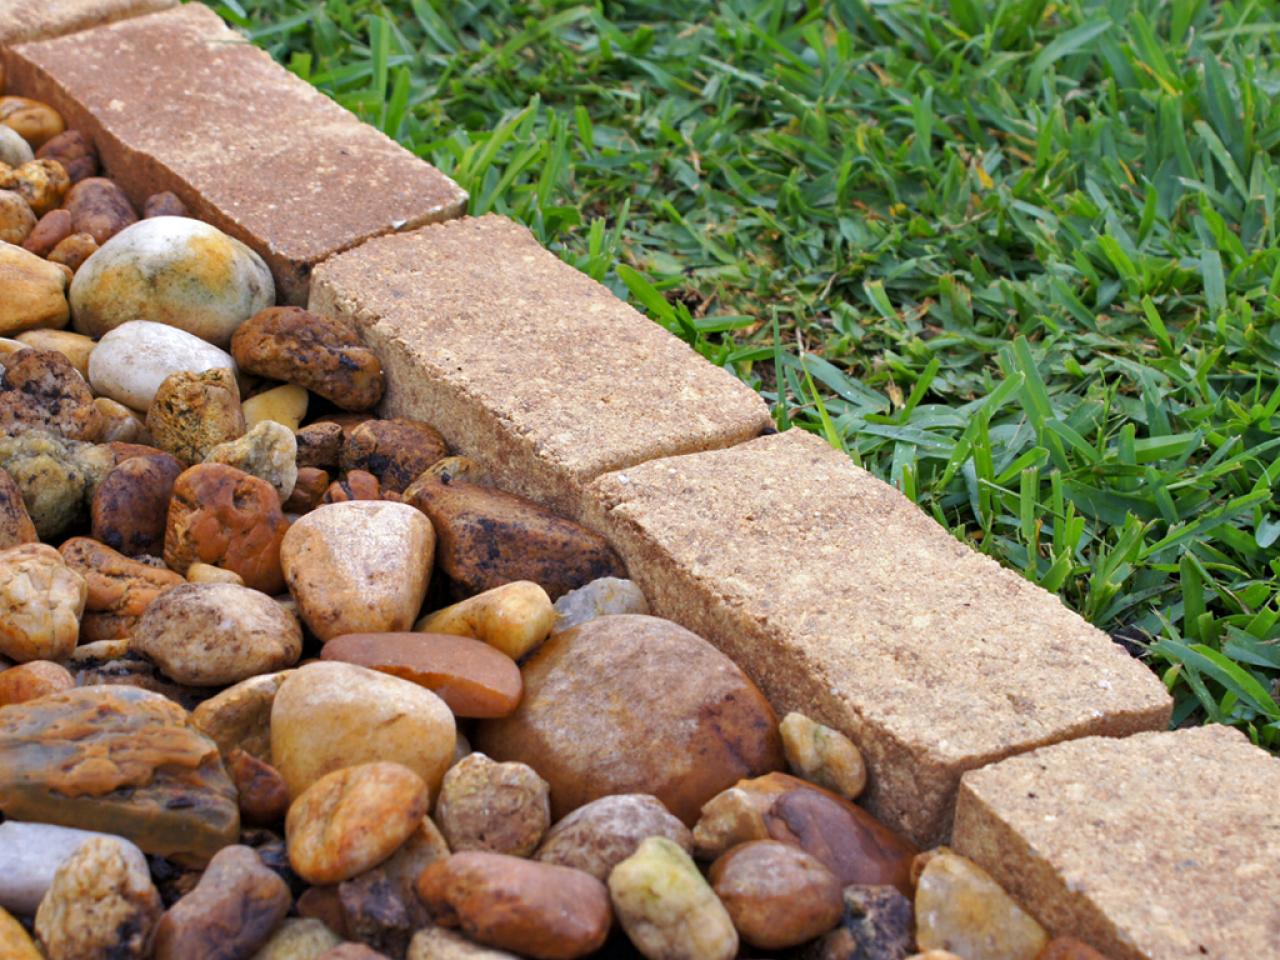 How To Install Landscape Edging, Landscaping Bricks For Edging